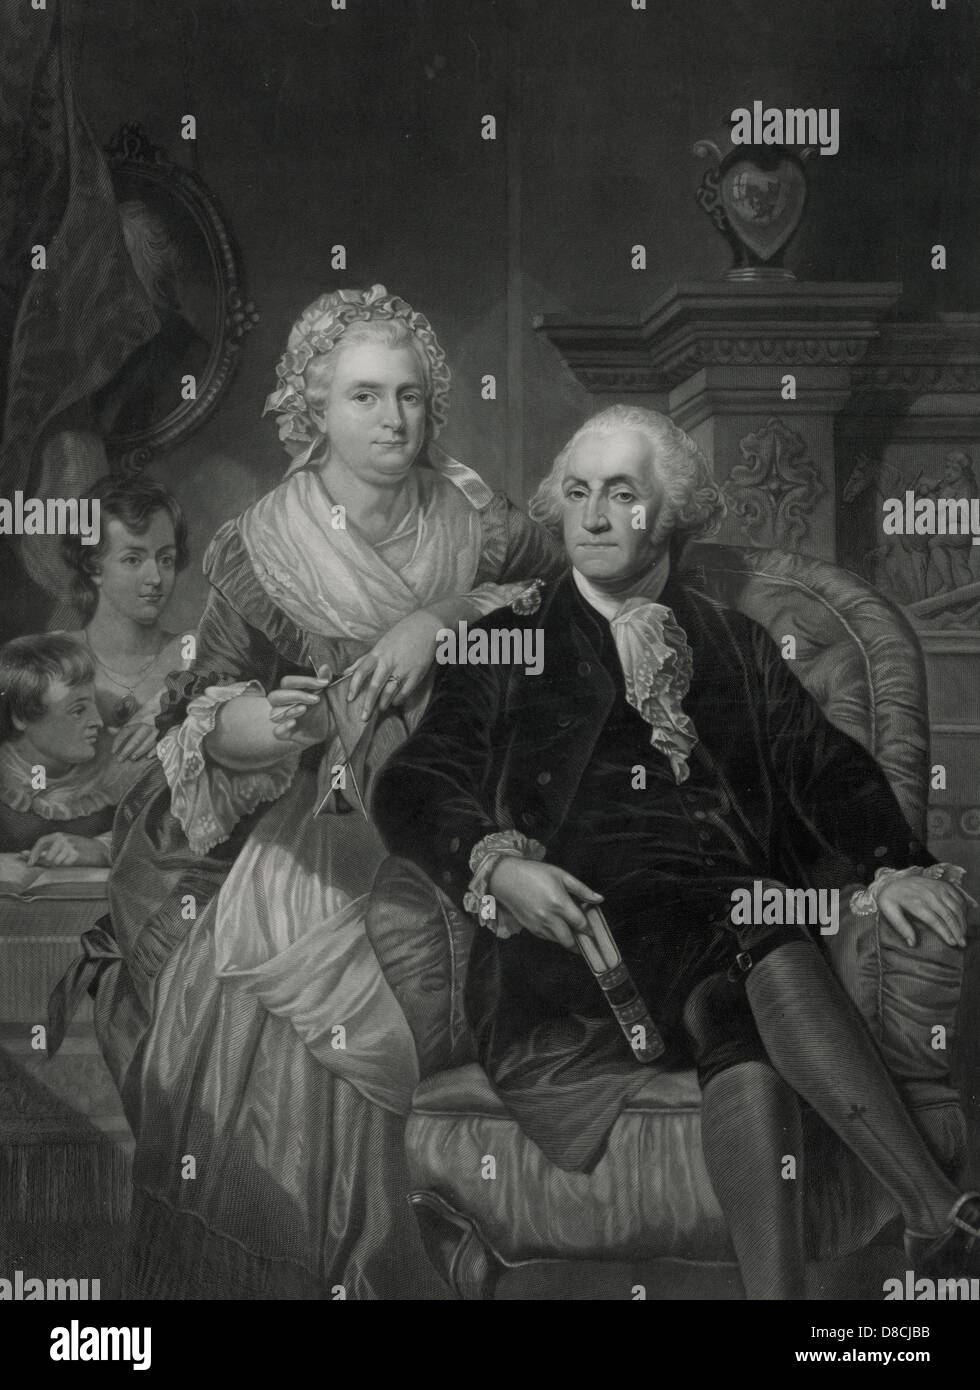 George Washimgton at home - George Washington, full-length portrait, sitting in a chair, facing front, holding a book, with Martha Washington next to the chair on the left. In the background, on the left, are two children and on the wall behind them is a portrait painting with the face obscured by a curtain. Stock Photo